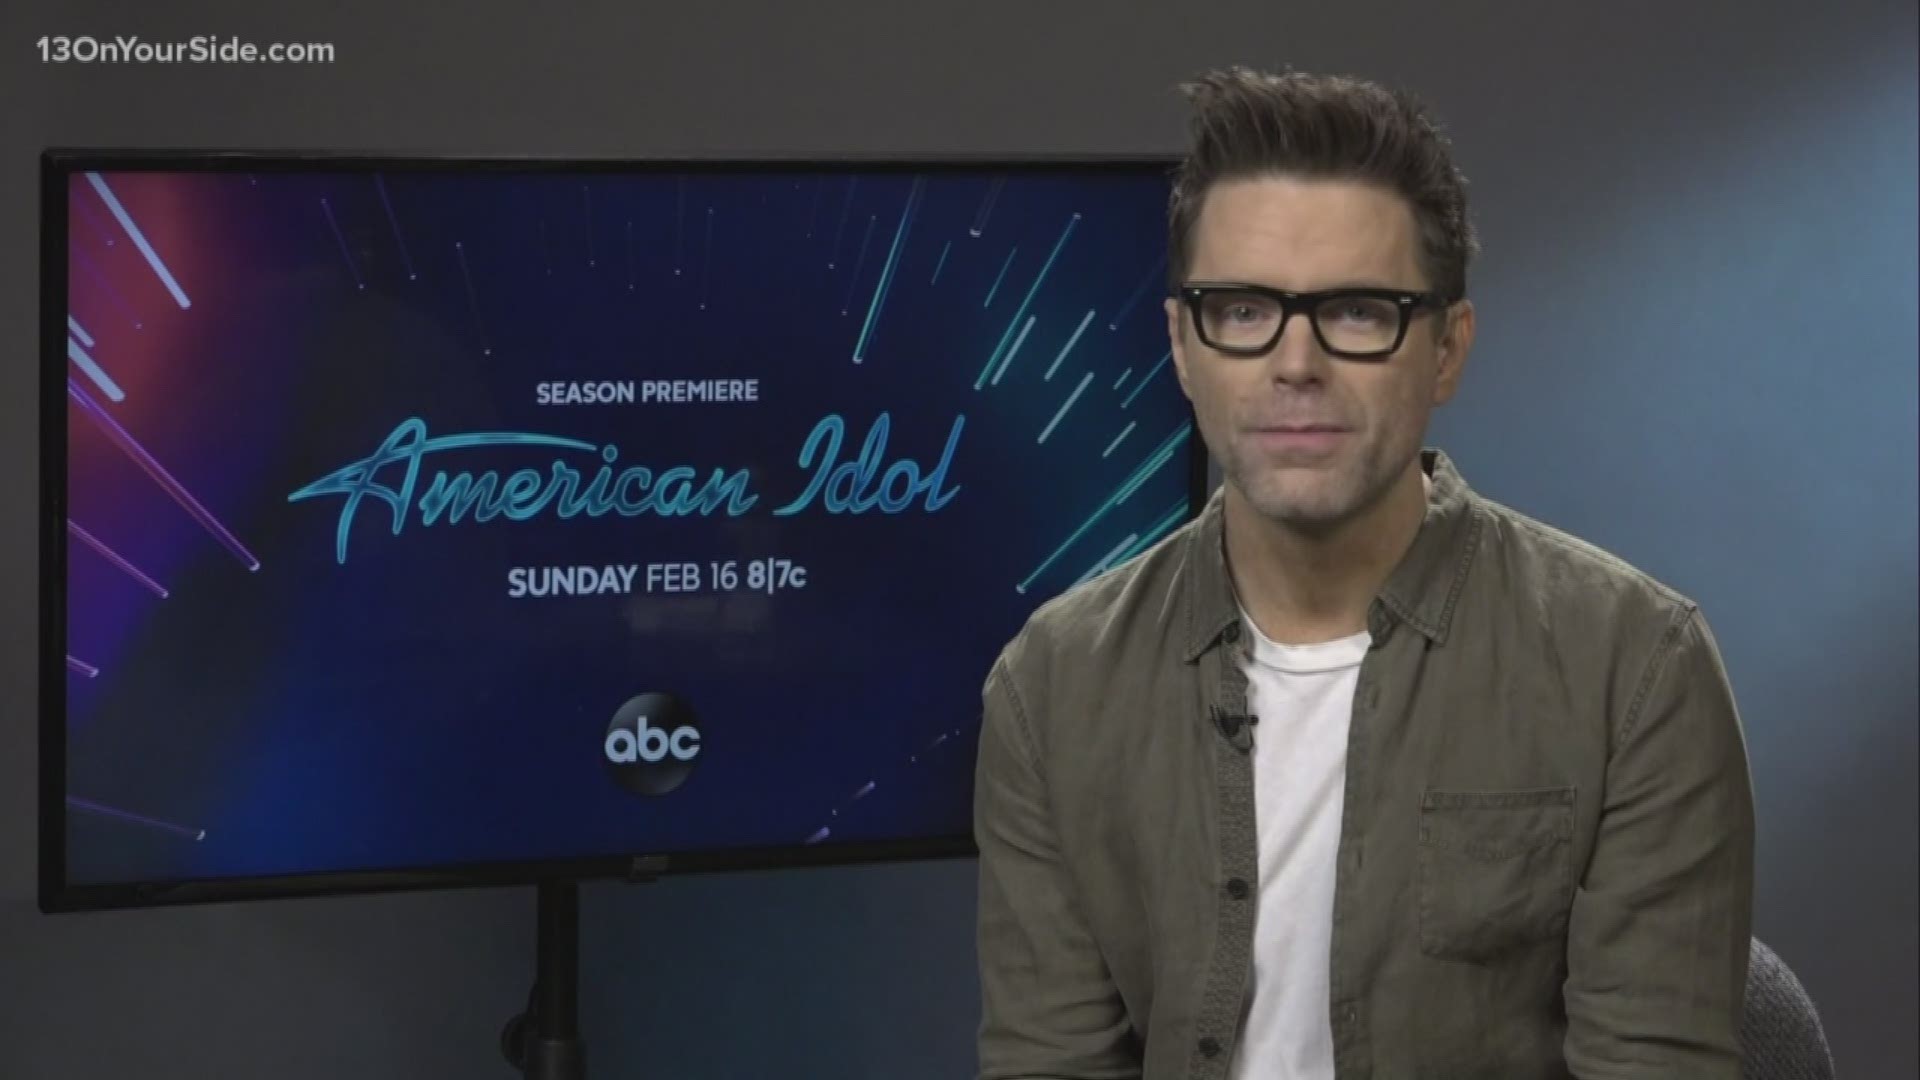 My West Michigan's Kirk Montgomery got a preview of what fans can expect see in season 3 of 'American Idol' from Bobby Bones.